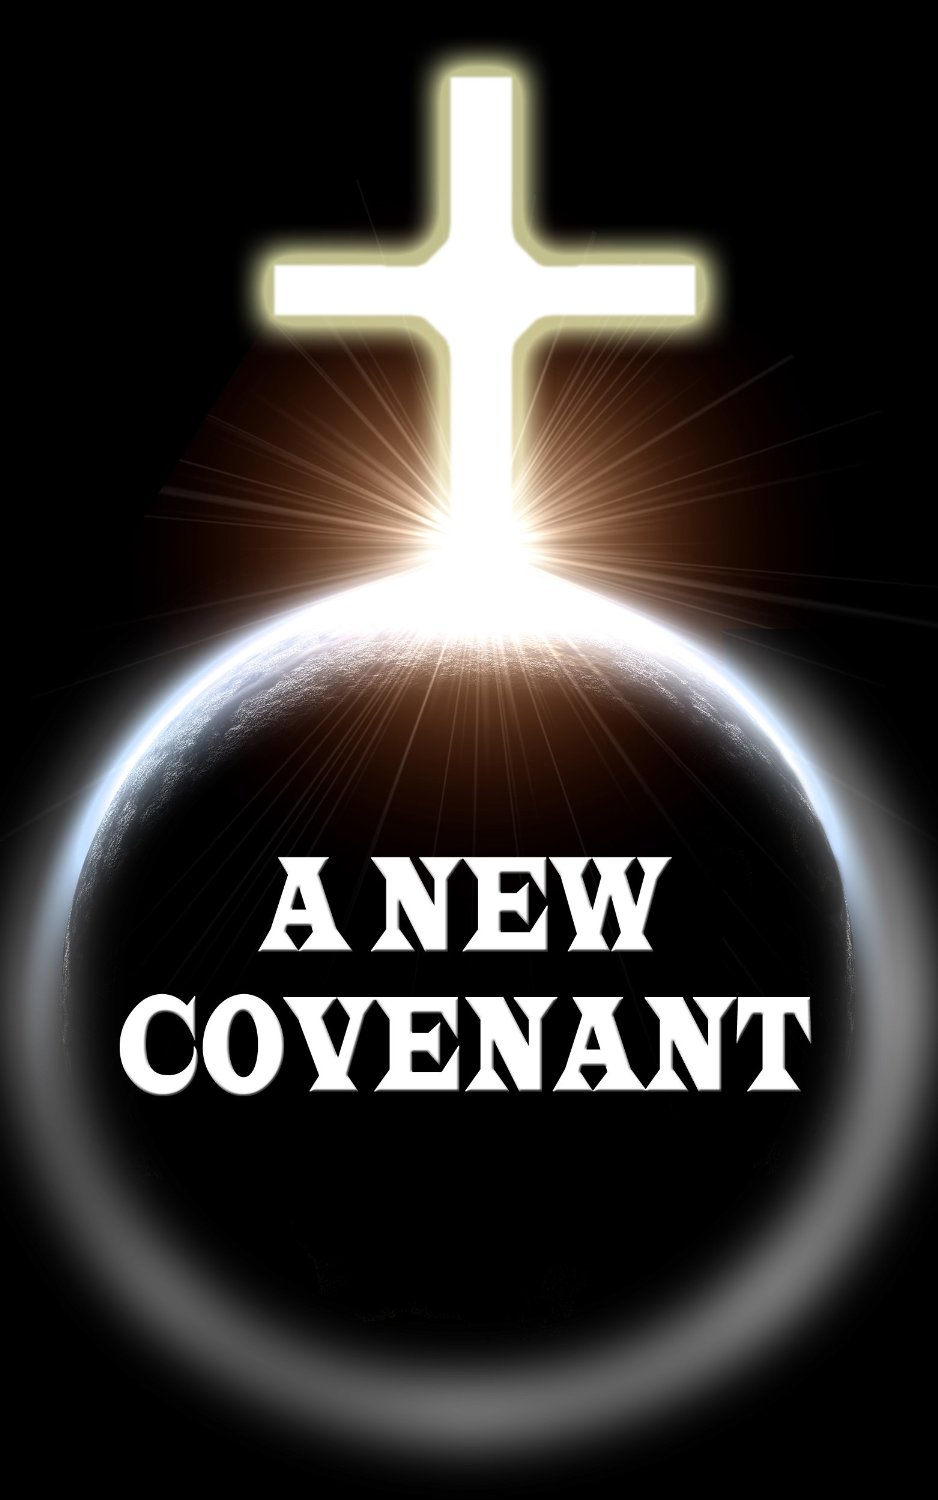 A New Covenant by Erec Stebbins